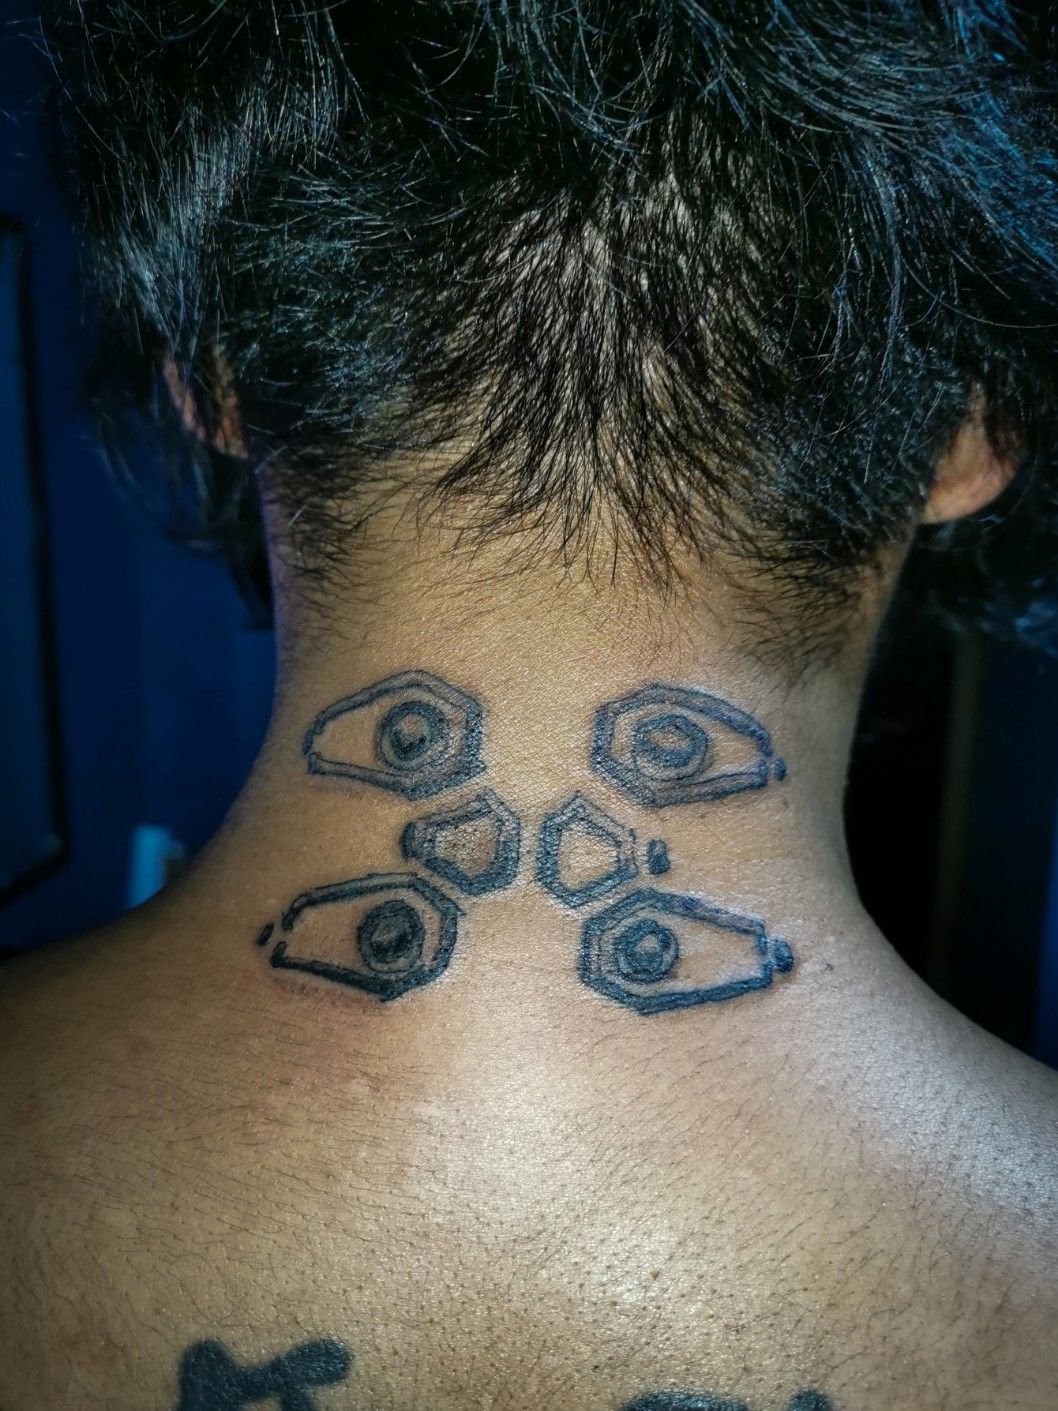 Tattoo uploaded by Víctor Axel • Ghost in the shell plugs #anime #ghostintheshell #blackwork • Tattoodo